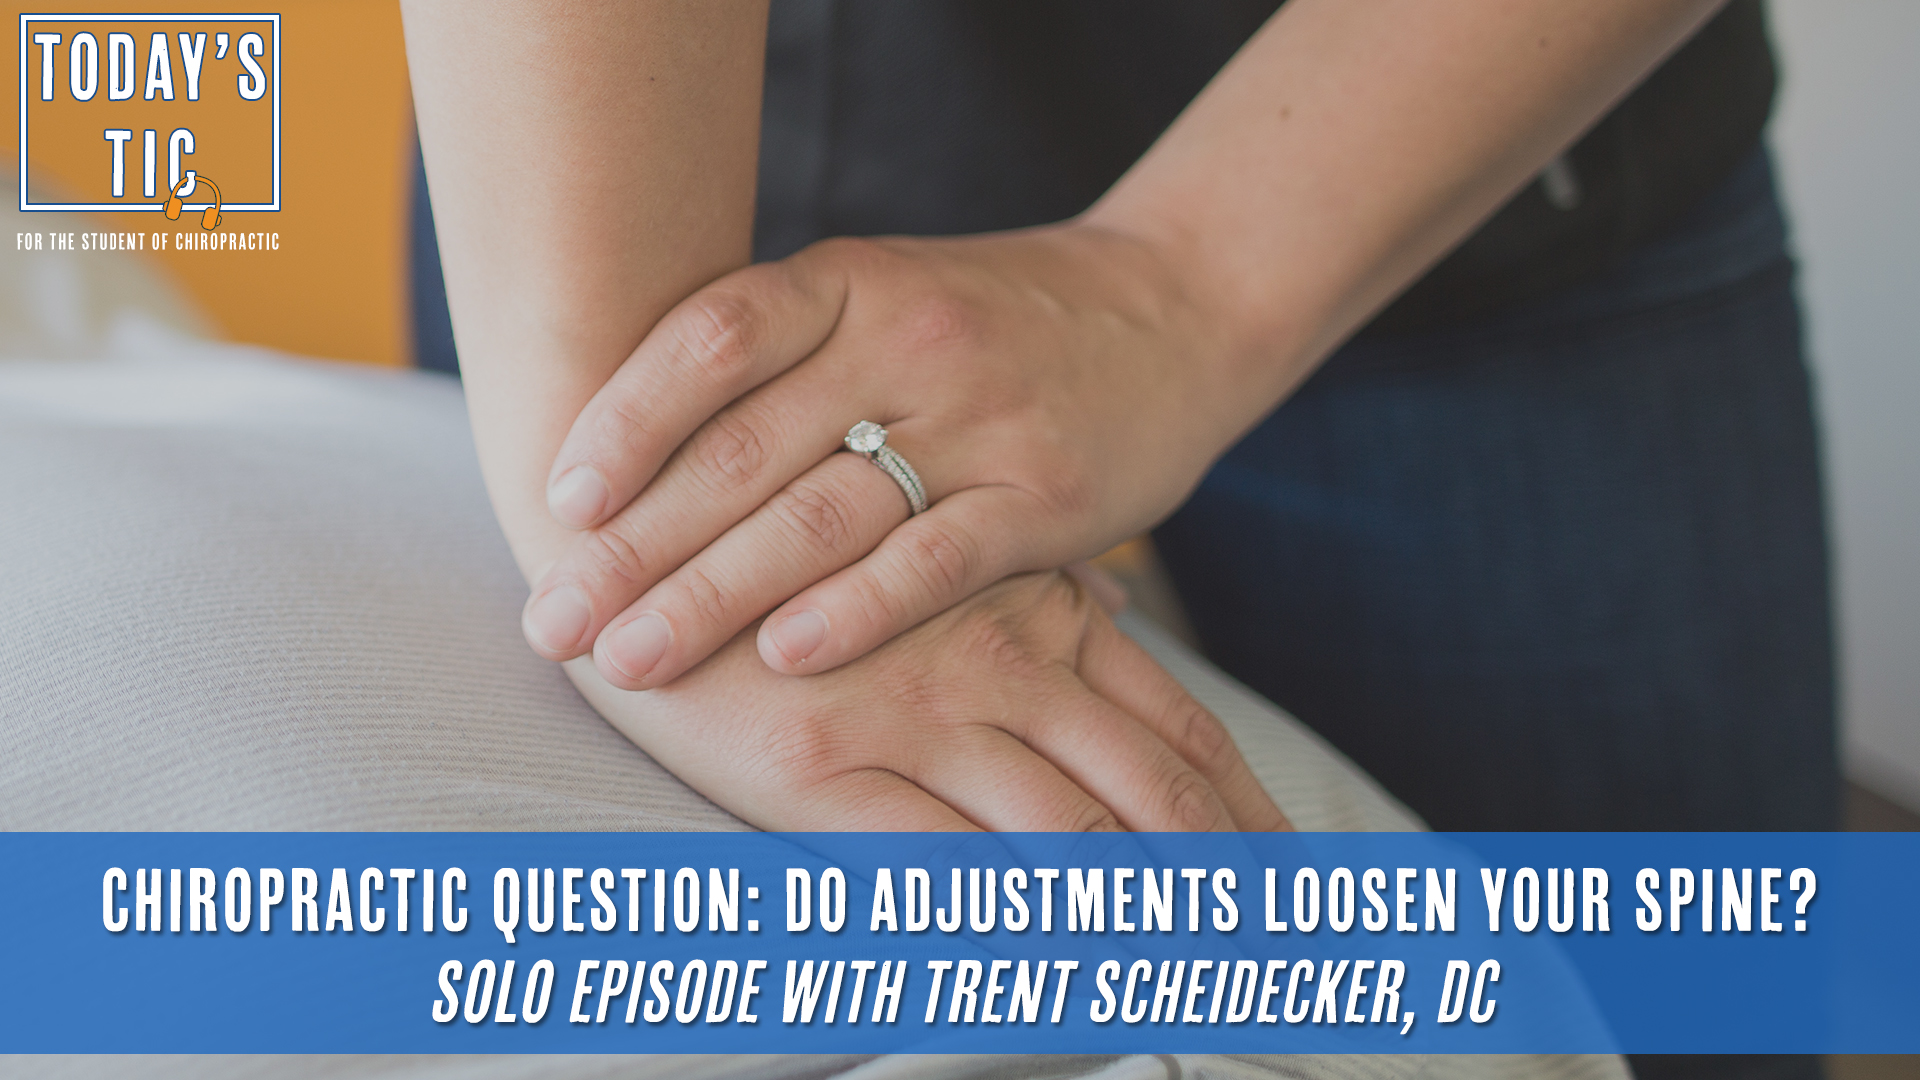 Chiropractic Question: Do Adjustments Loosen Your Spine?